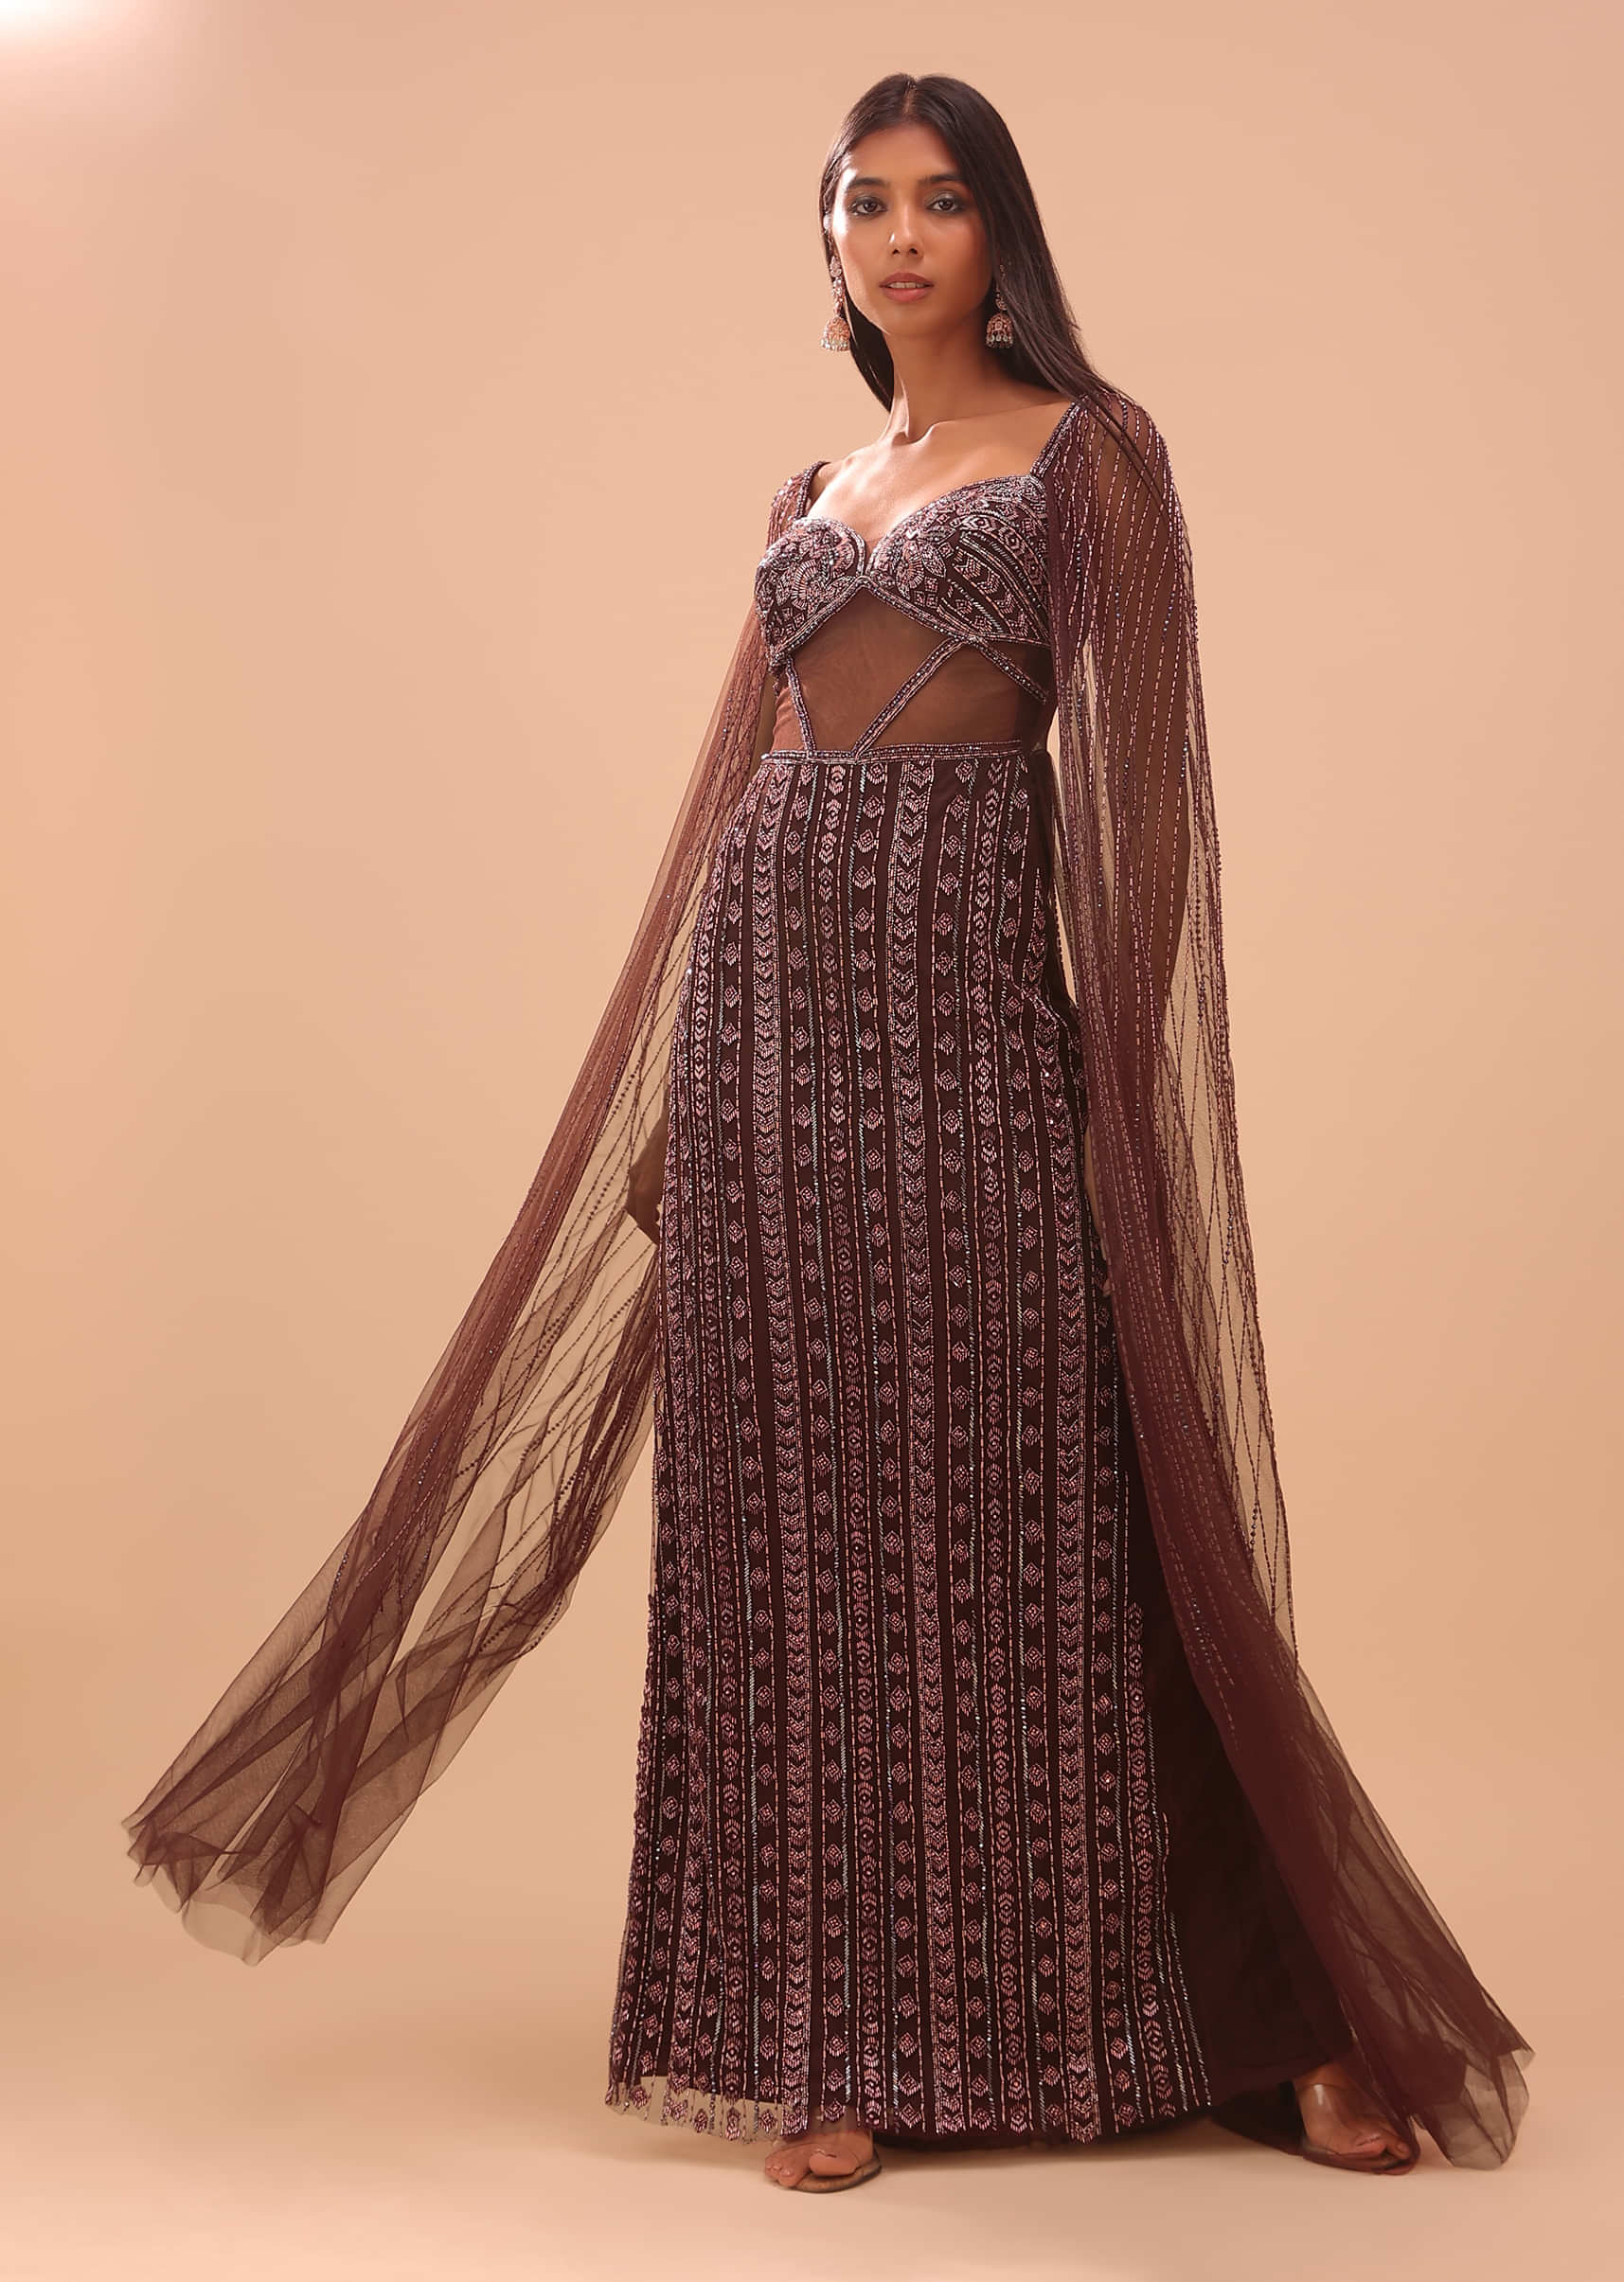 Chocolate Brown Gown In With Dreamy Cape Sleeves - NOOR 2022